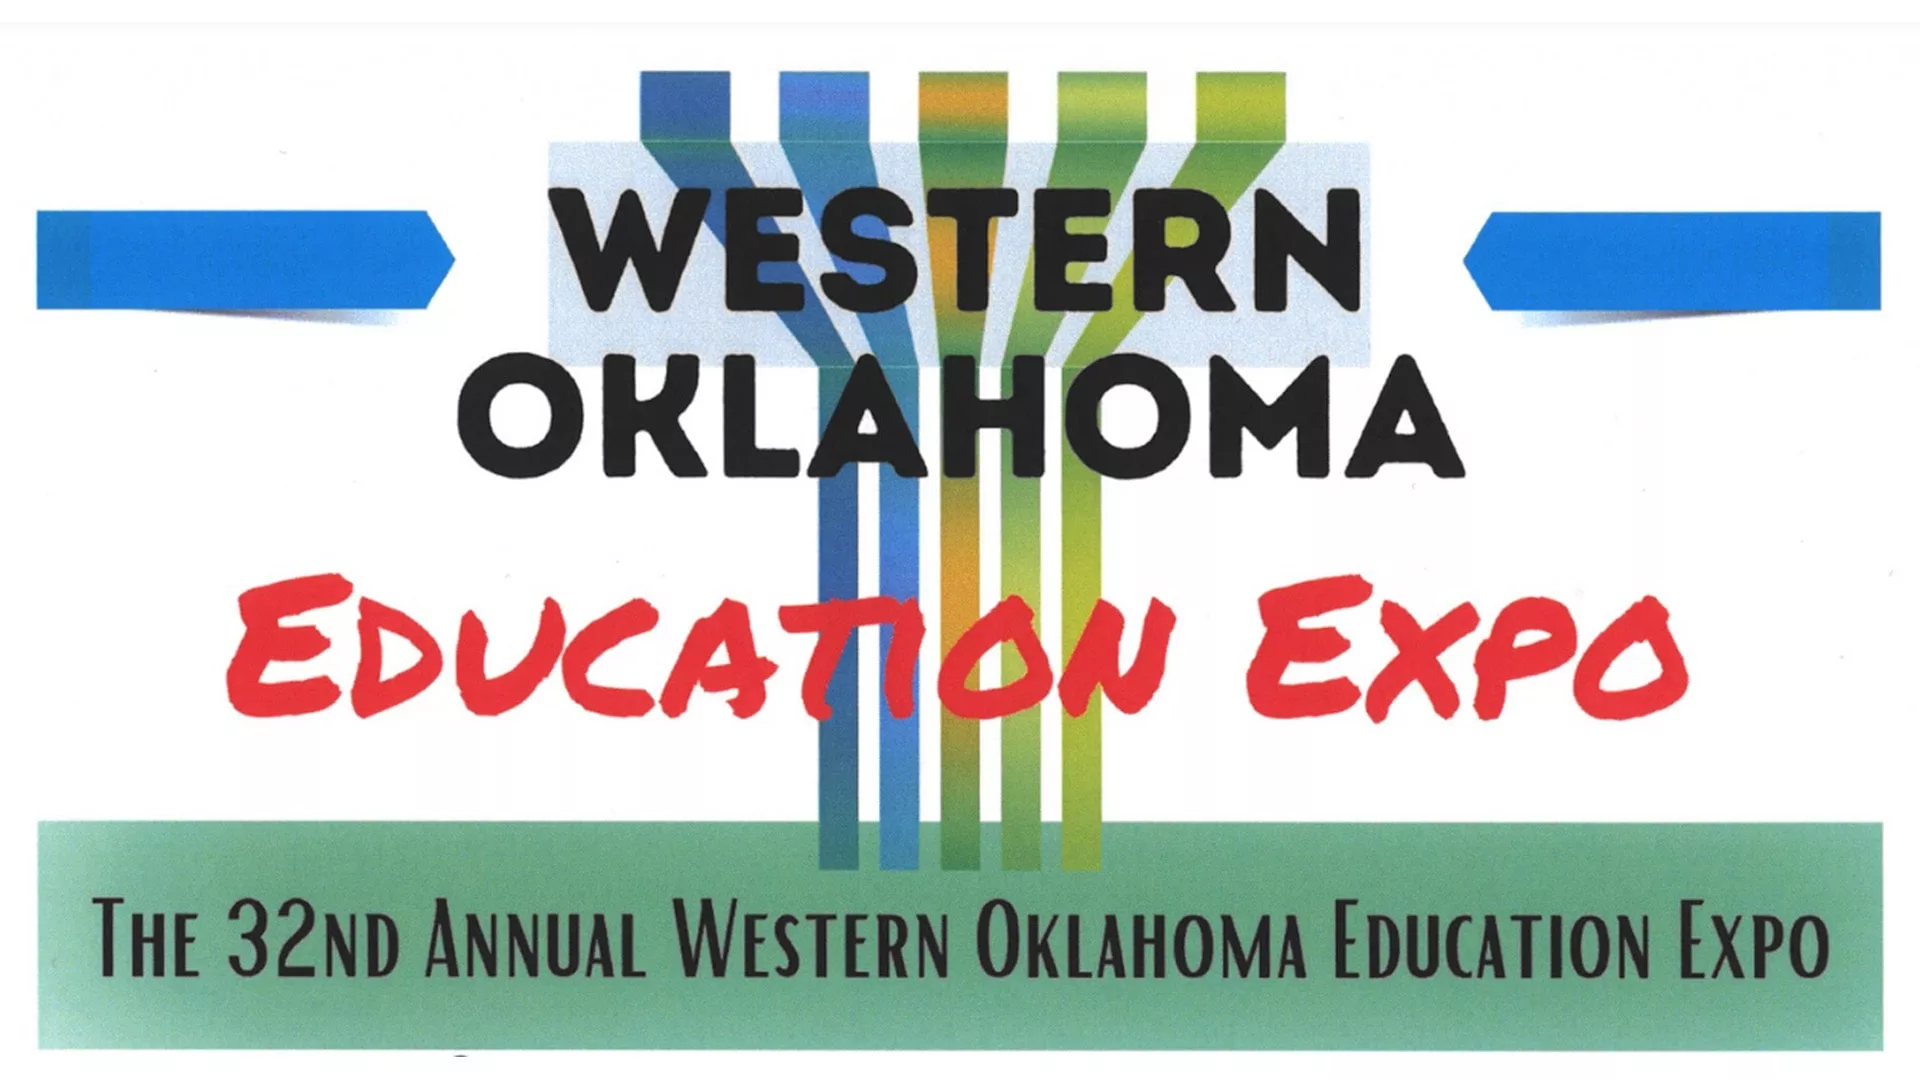 Logo of the 32nd Annual Western Oklahoma Education Expo